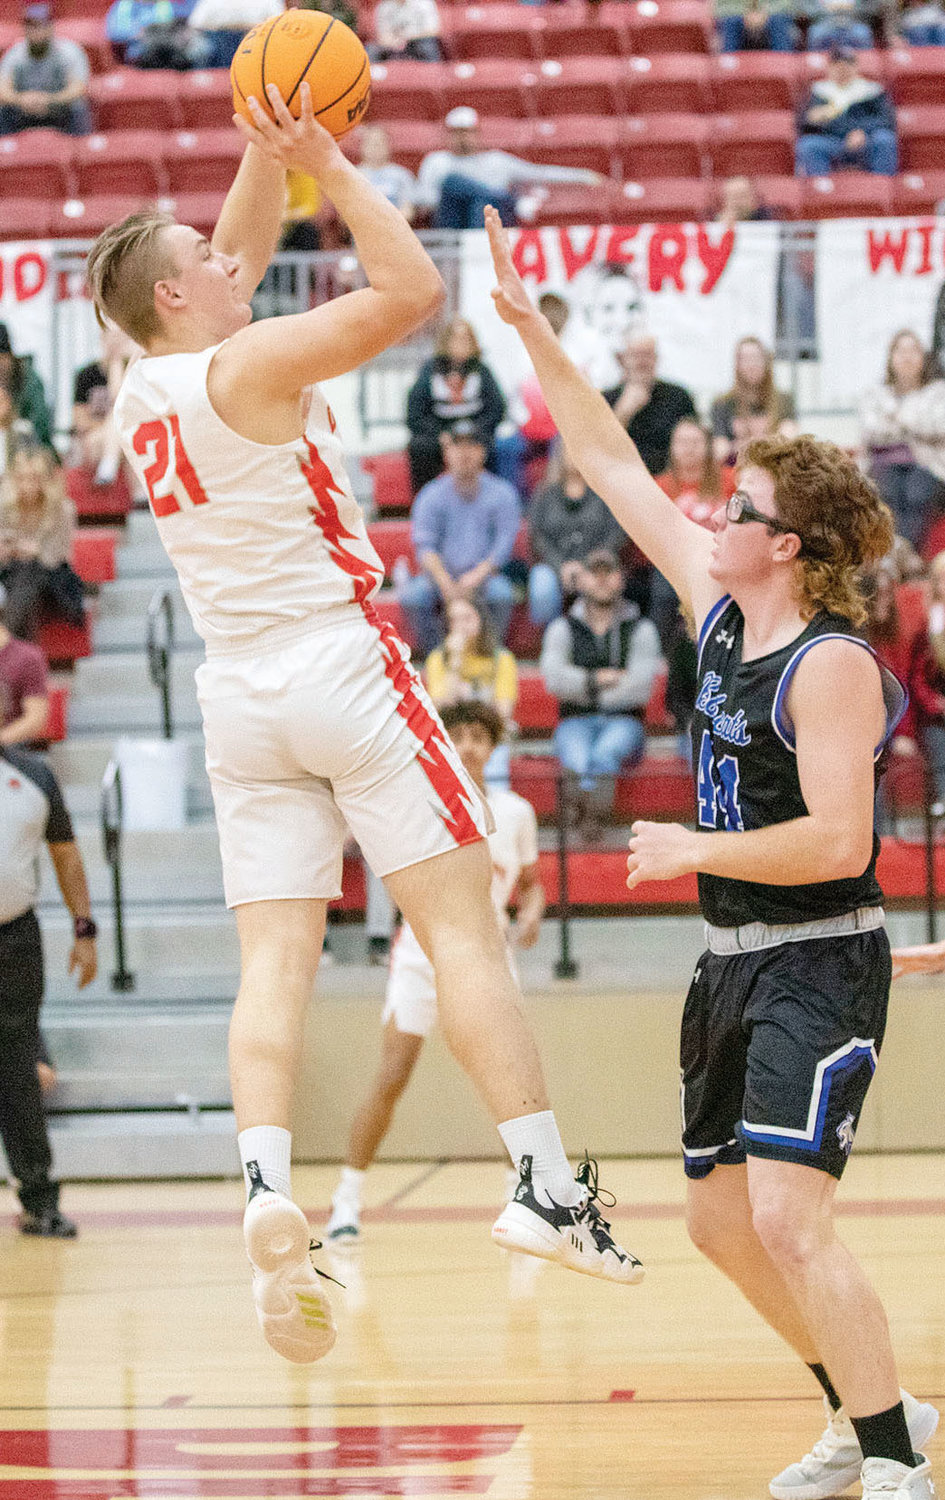 Purcell junior Hayden Ice shoots over a Bridge Creek defender January 4 during the Dragons’ 66-37 win. Ice scored eight points.